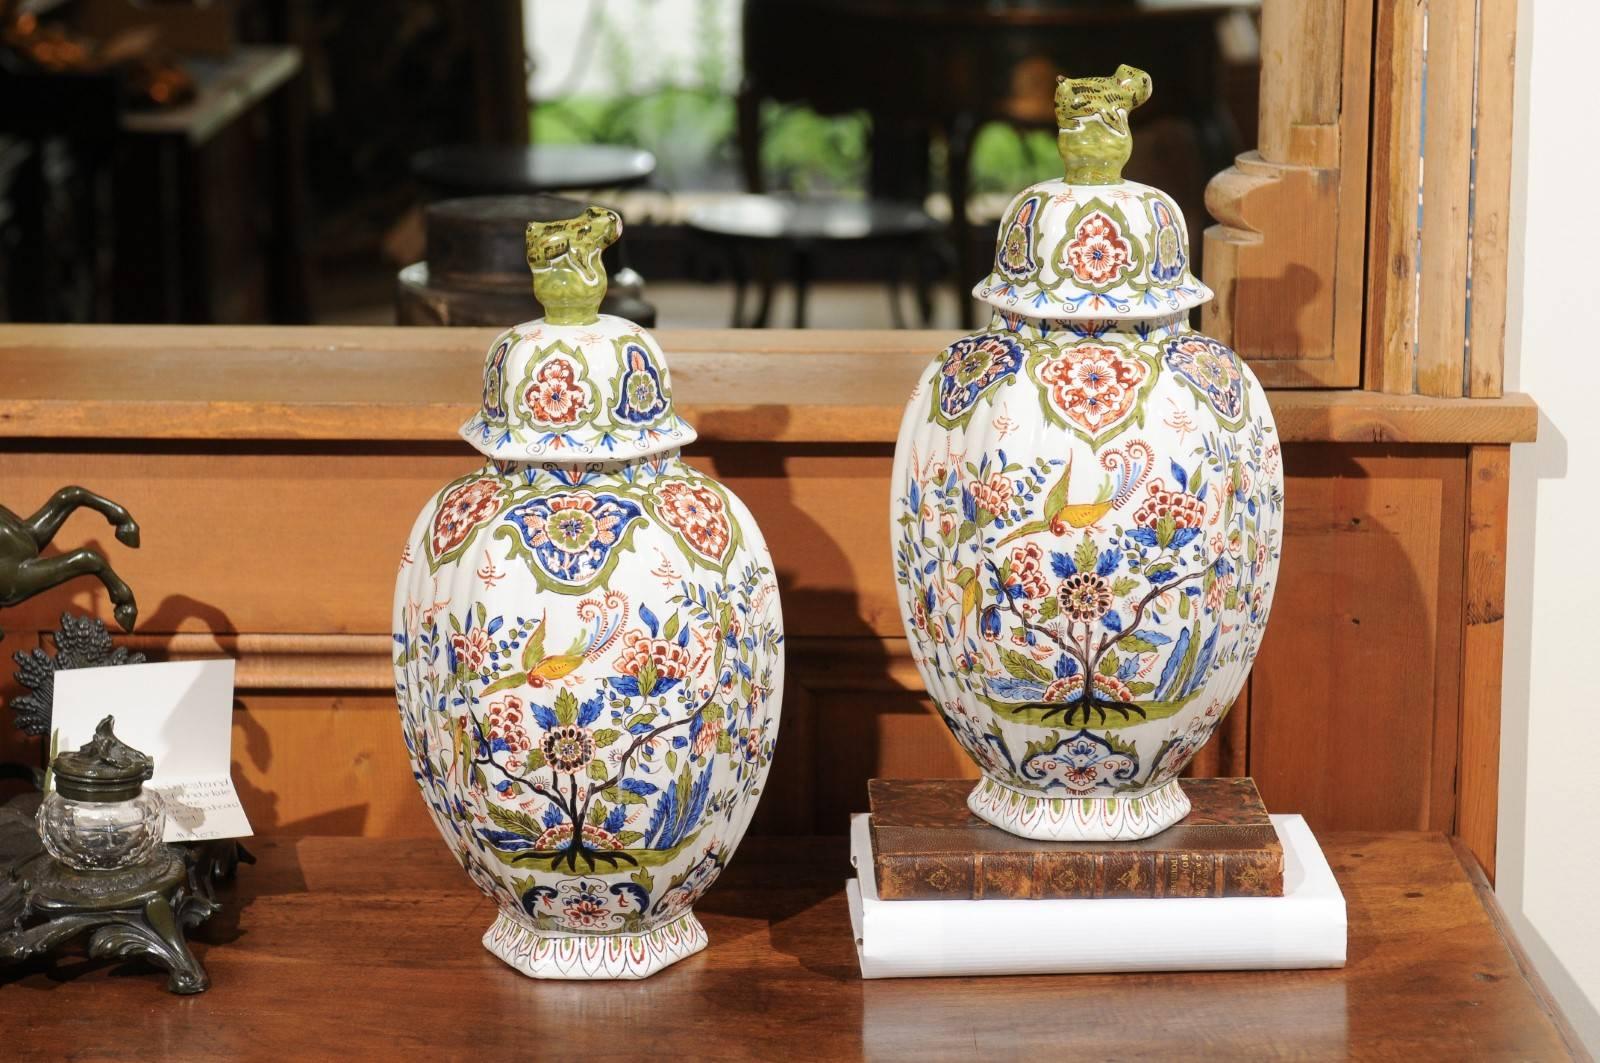 Pair of 19th century Faience Jars with Lids from Devres, France

Many people might think these jars were made in Holland but in fact many factories all over Europe made faience similar to that made in Delft. The colors are bright and clear adding